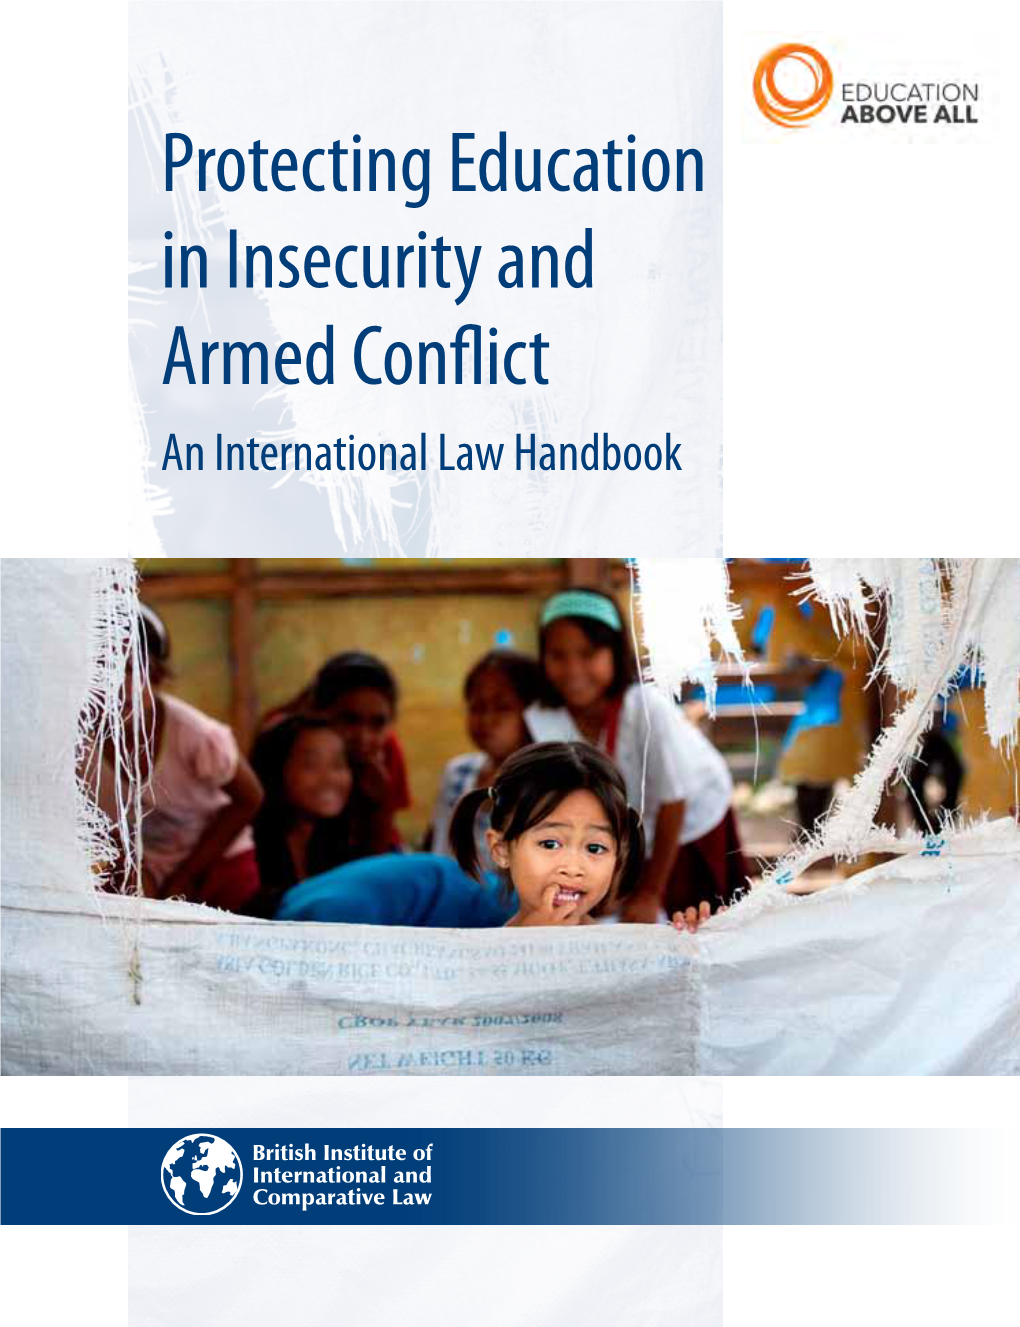 Protecting Education in Insecurity and Armed Conflict: an International Law Handbook